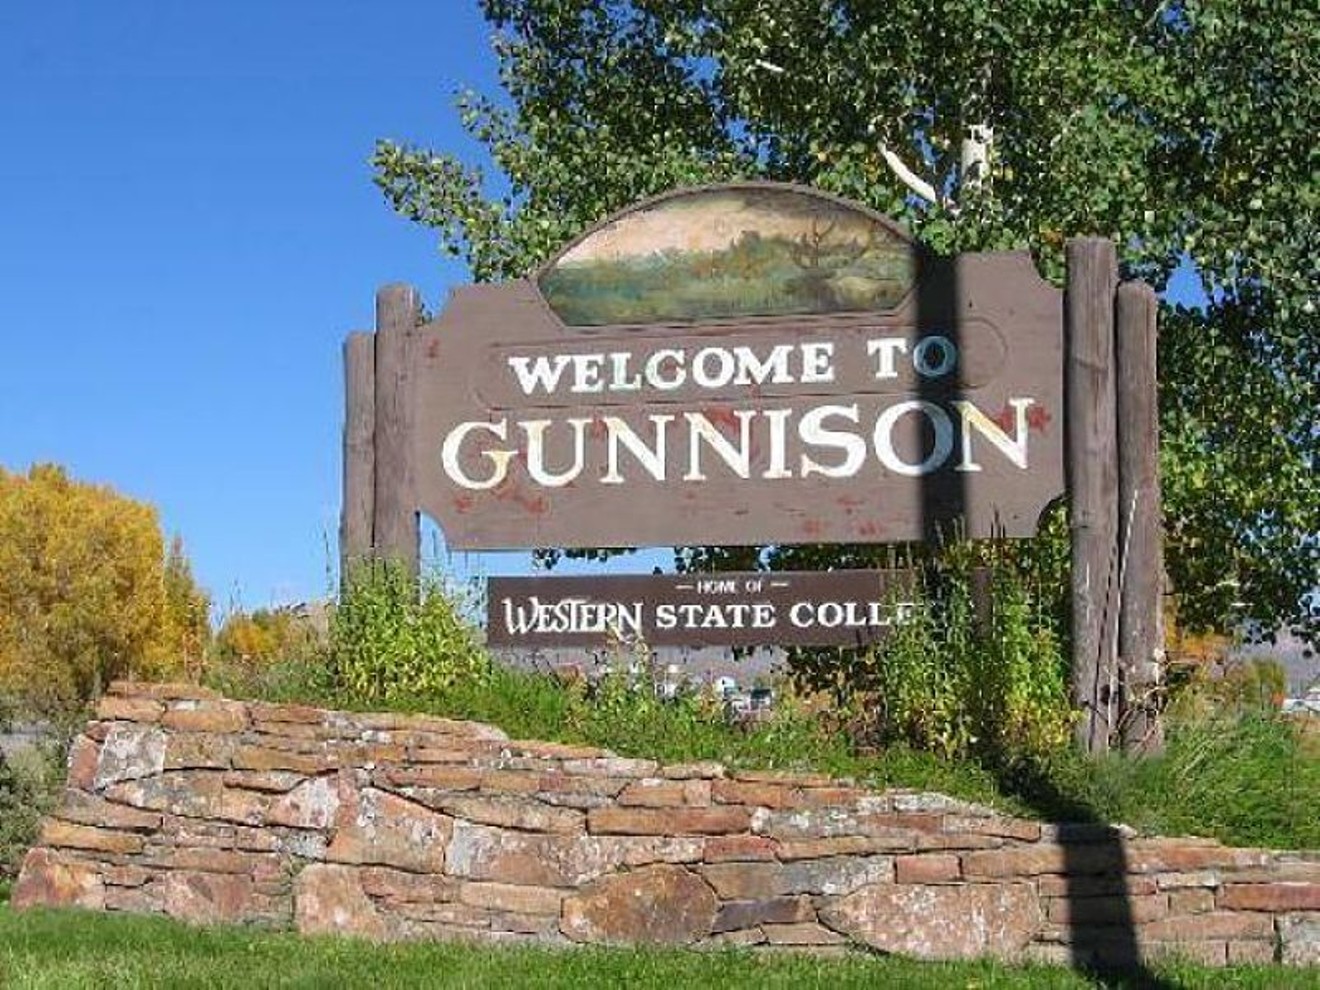 Welcome to Gunnison...now go home.